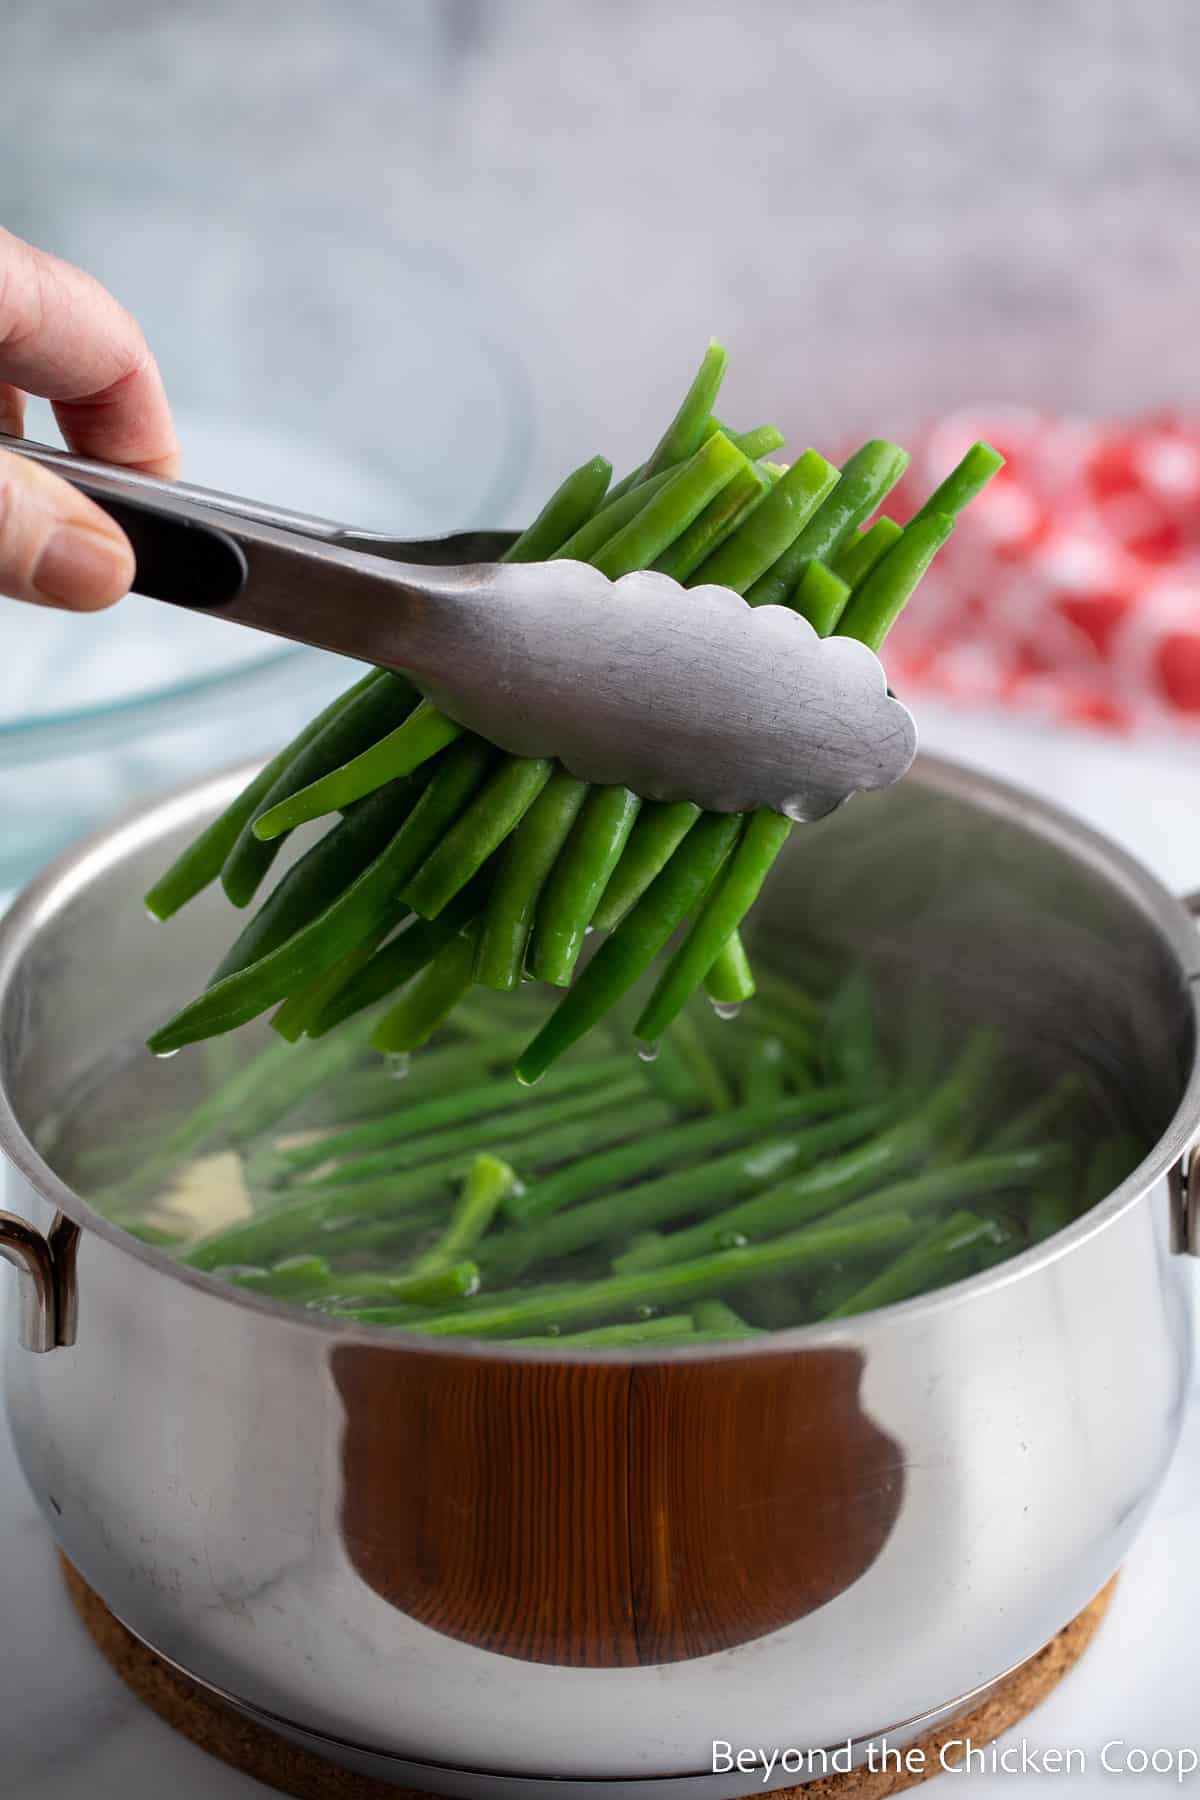 Removing green beans from boiling water.